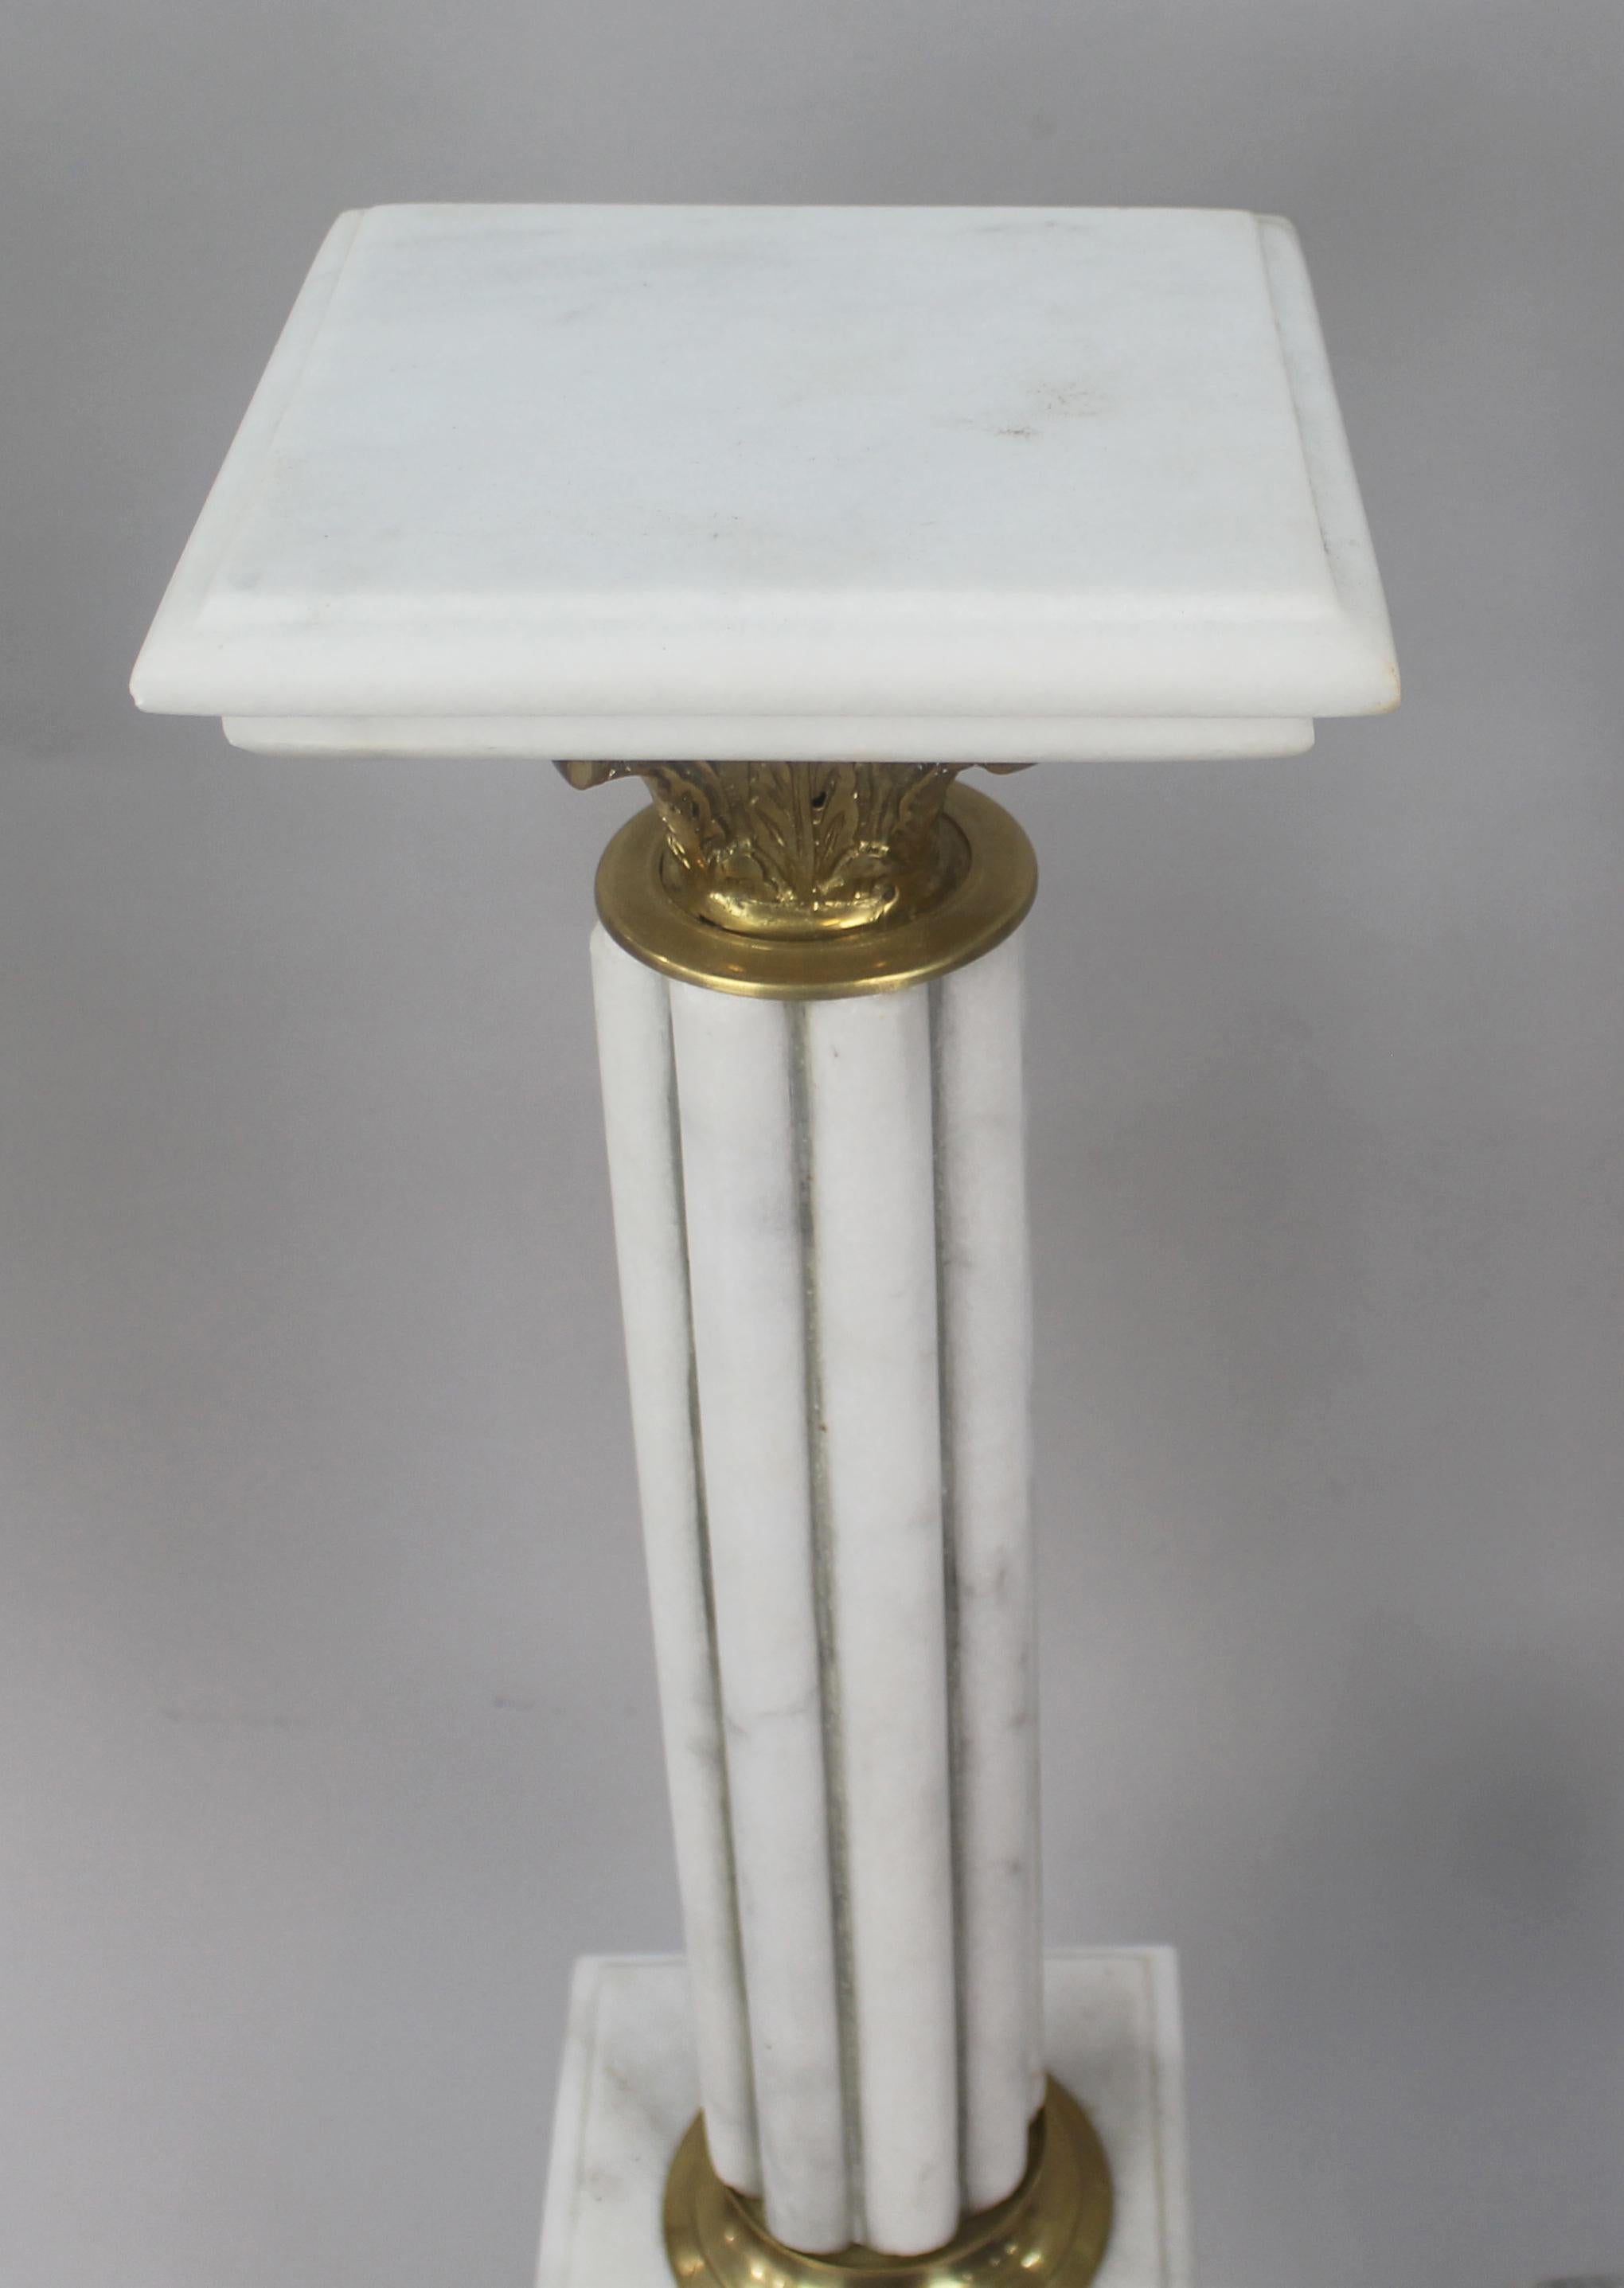 20th Century Pair of Ornate Marble Columns For Sale